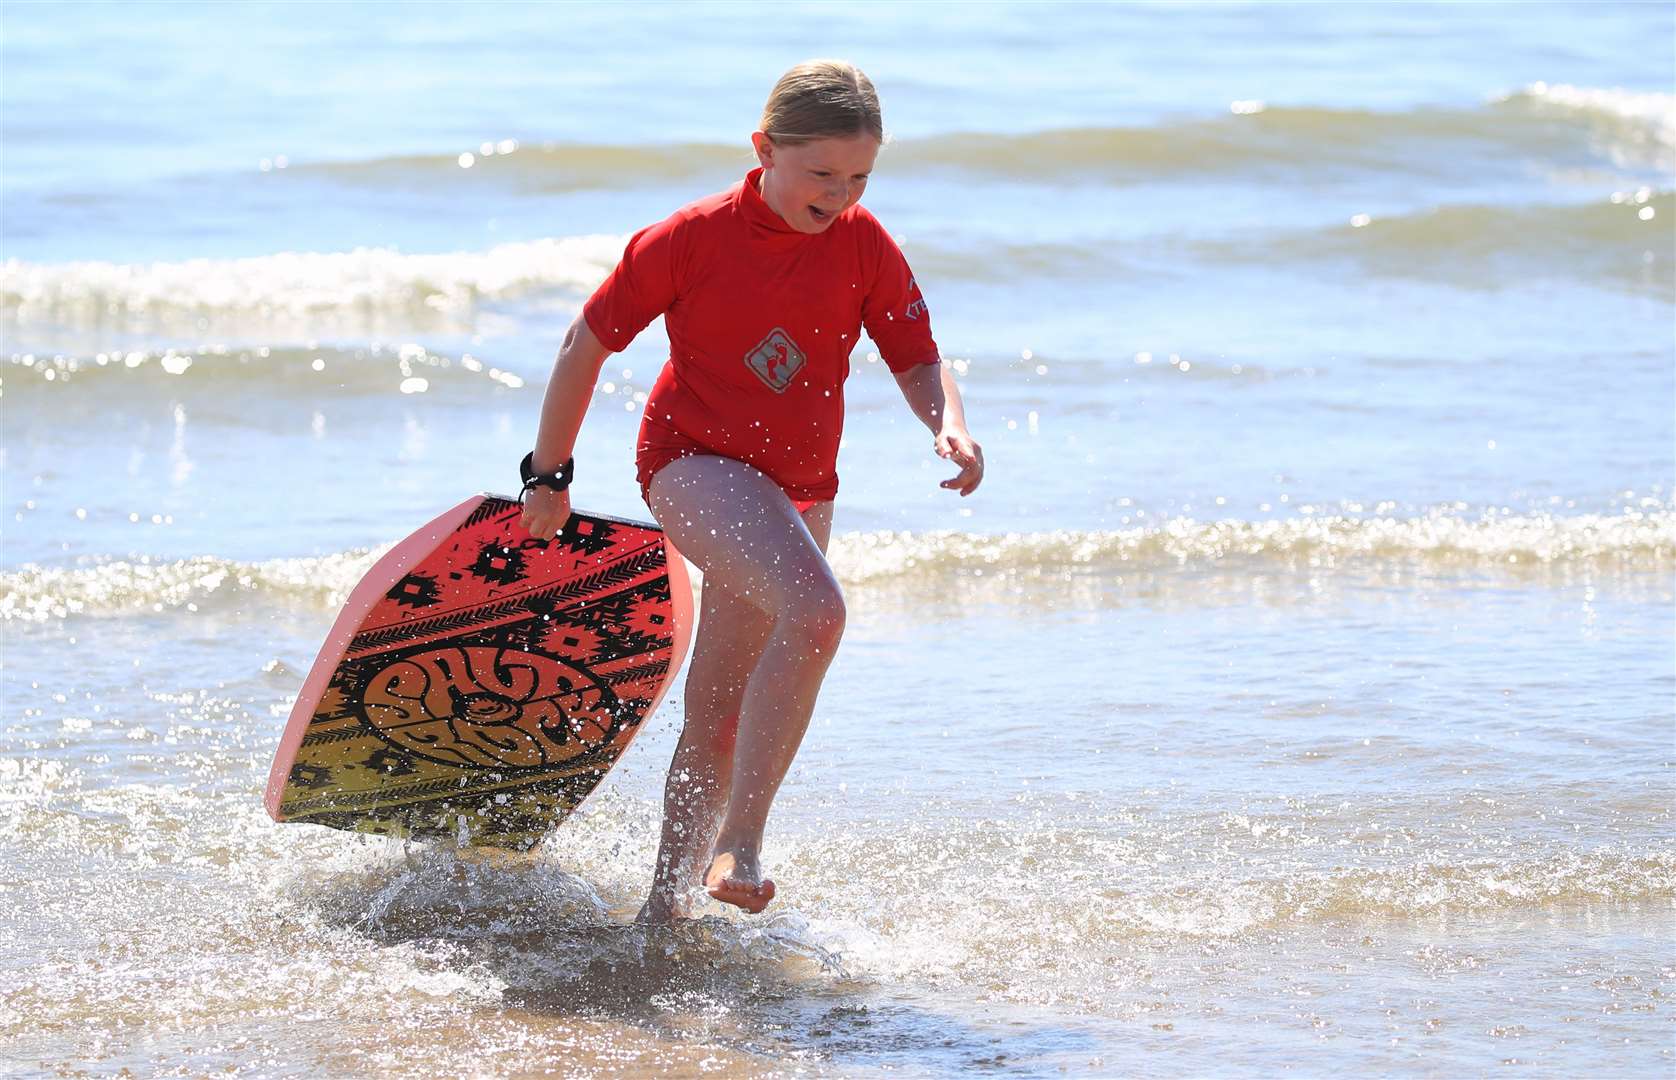 Oliva Atkins, 10, keeps cool in the sea at the East Yorkshire resort (Danny Lawson/PA)